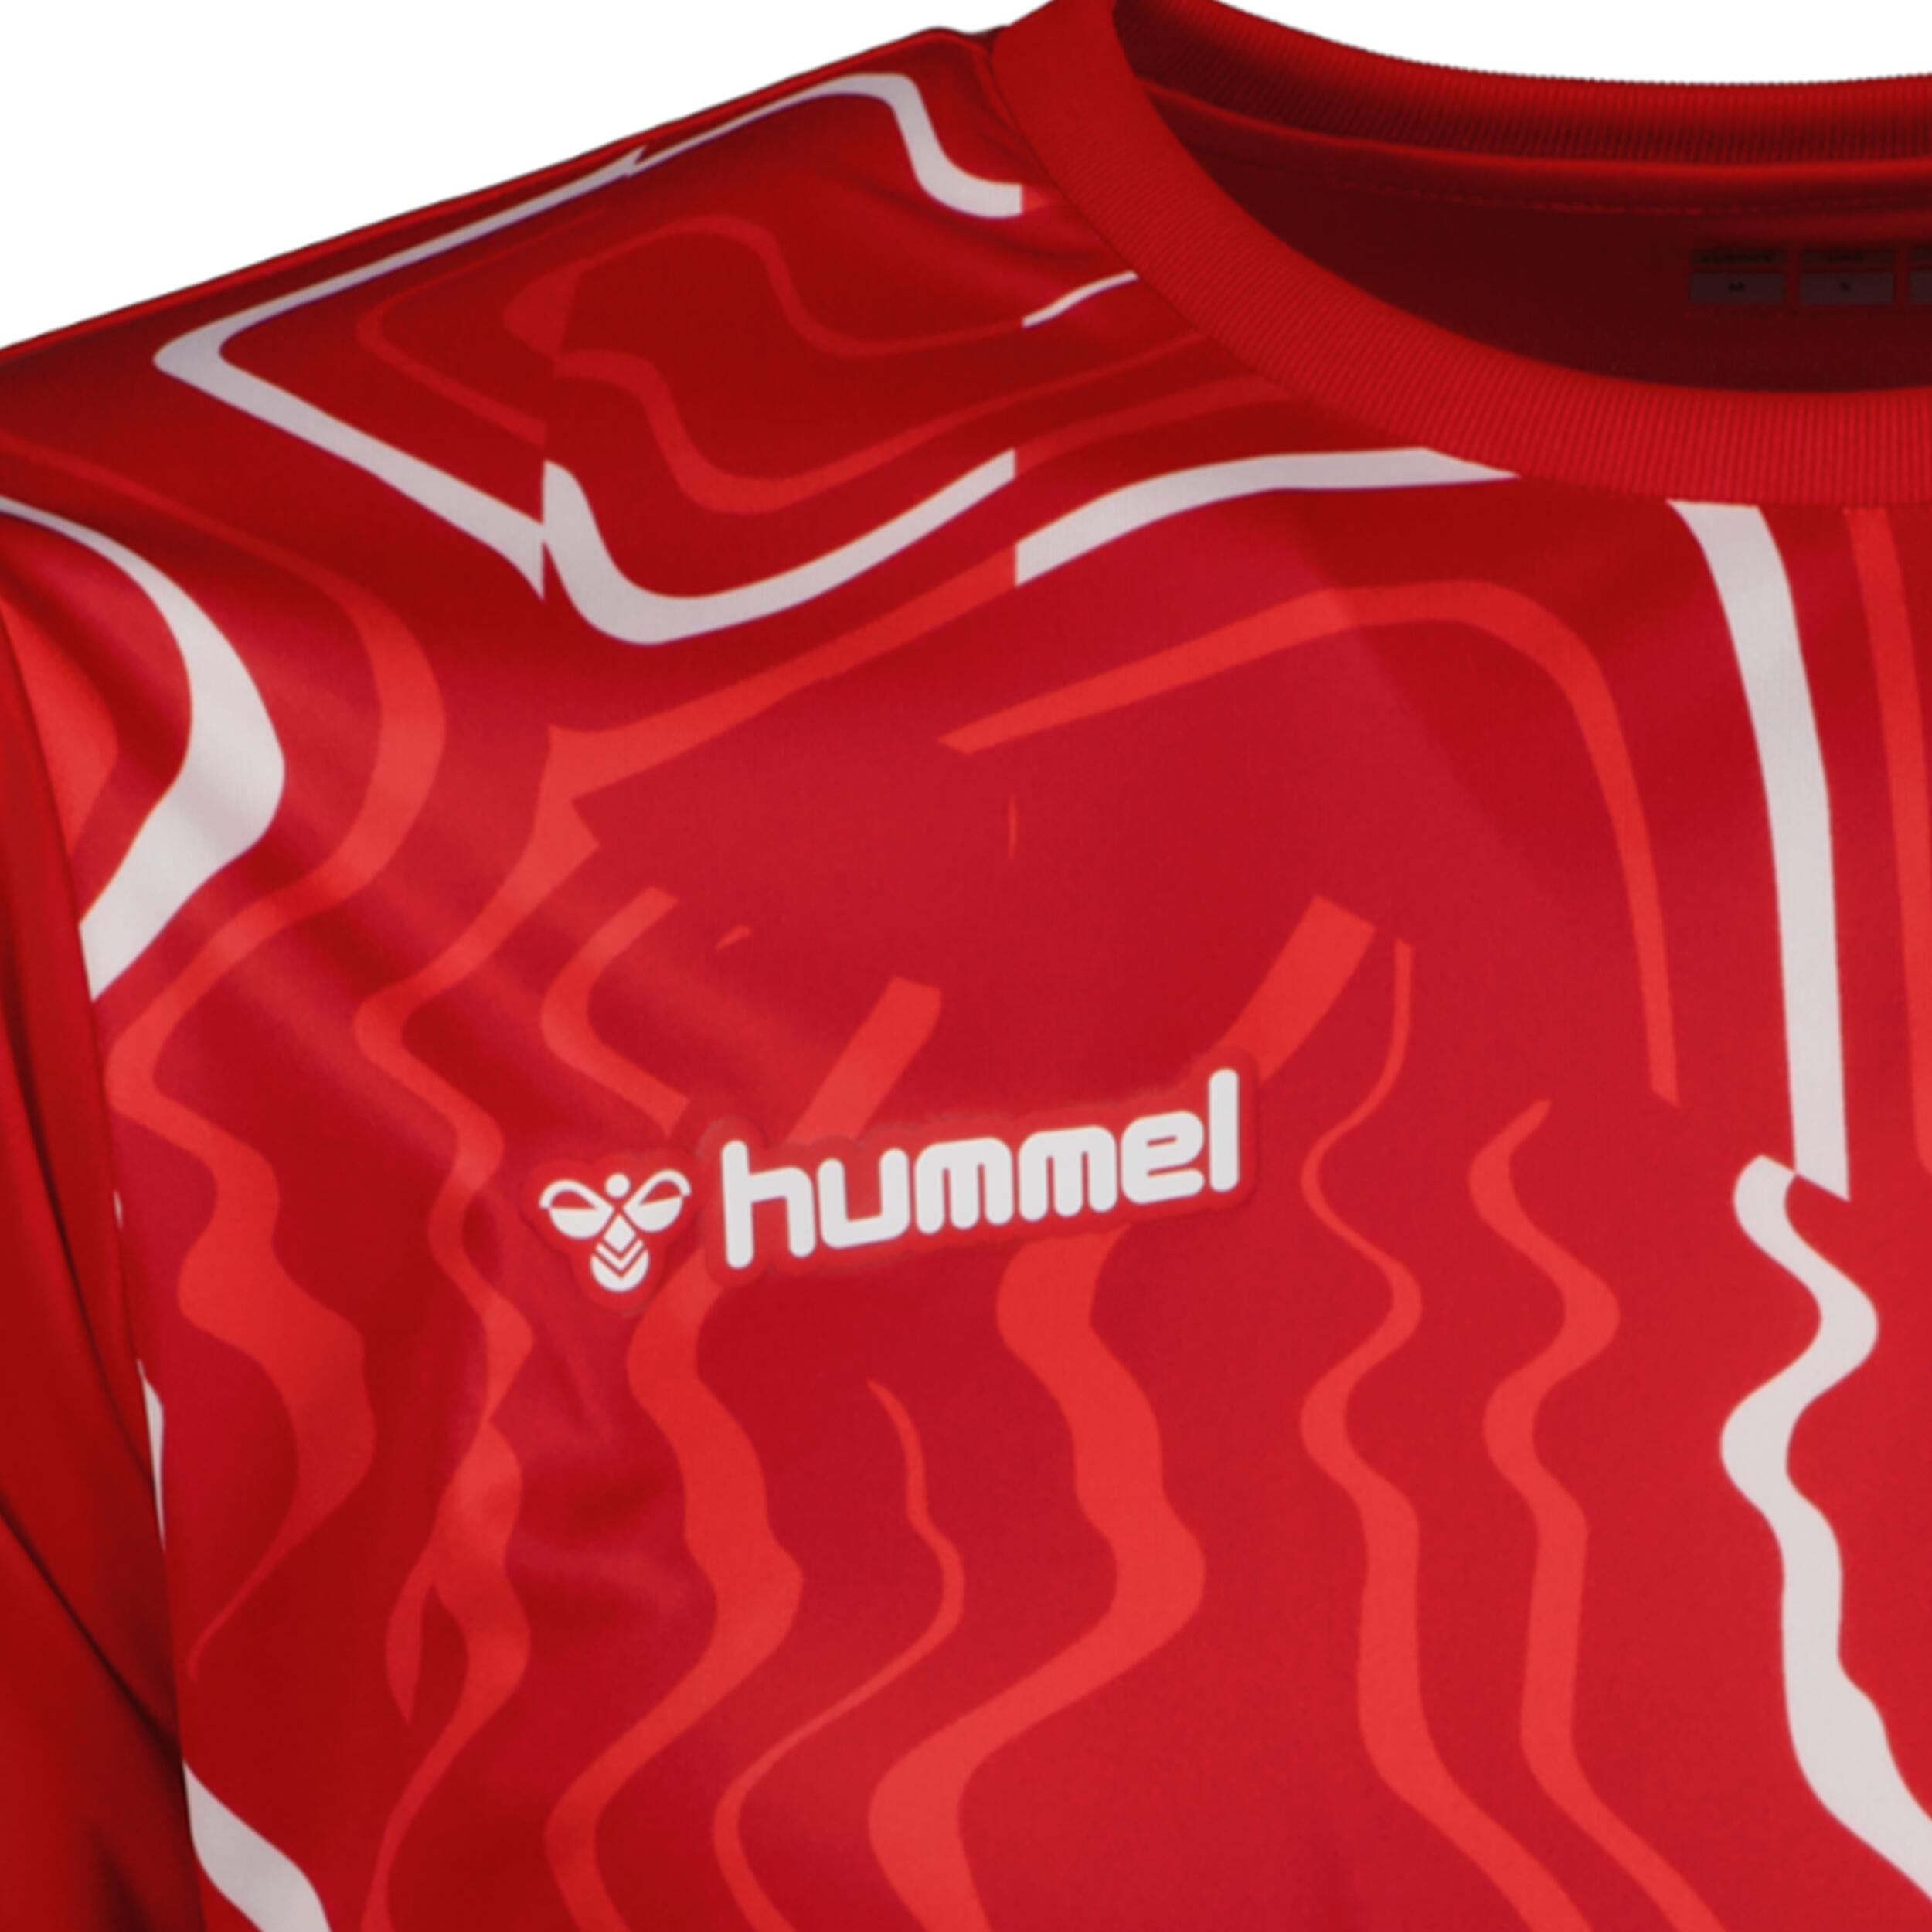 Hydro jersey for kids, great for football, in true red/dark red/white 3/3